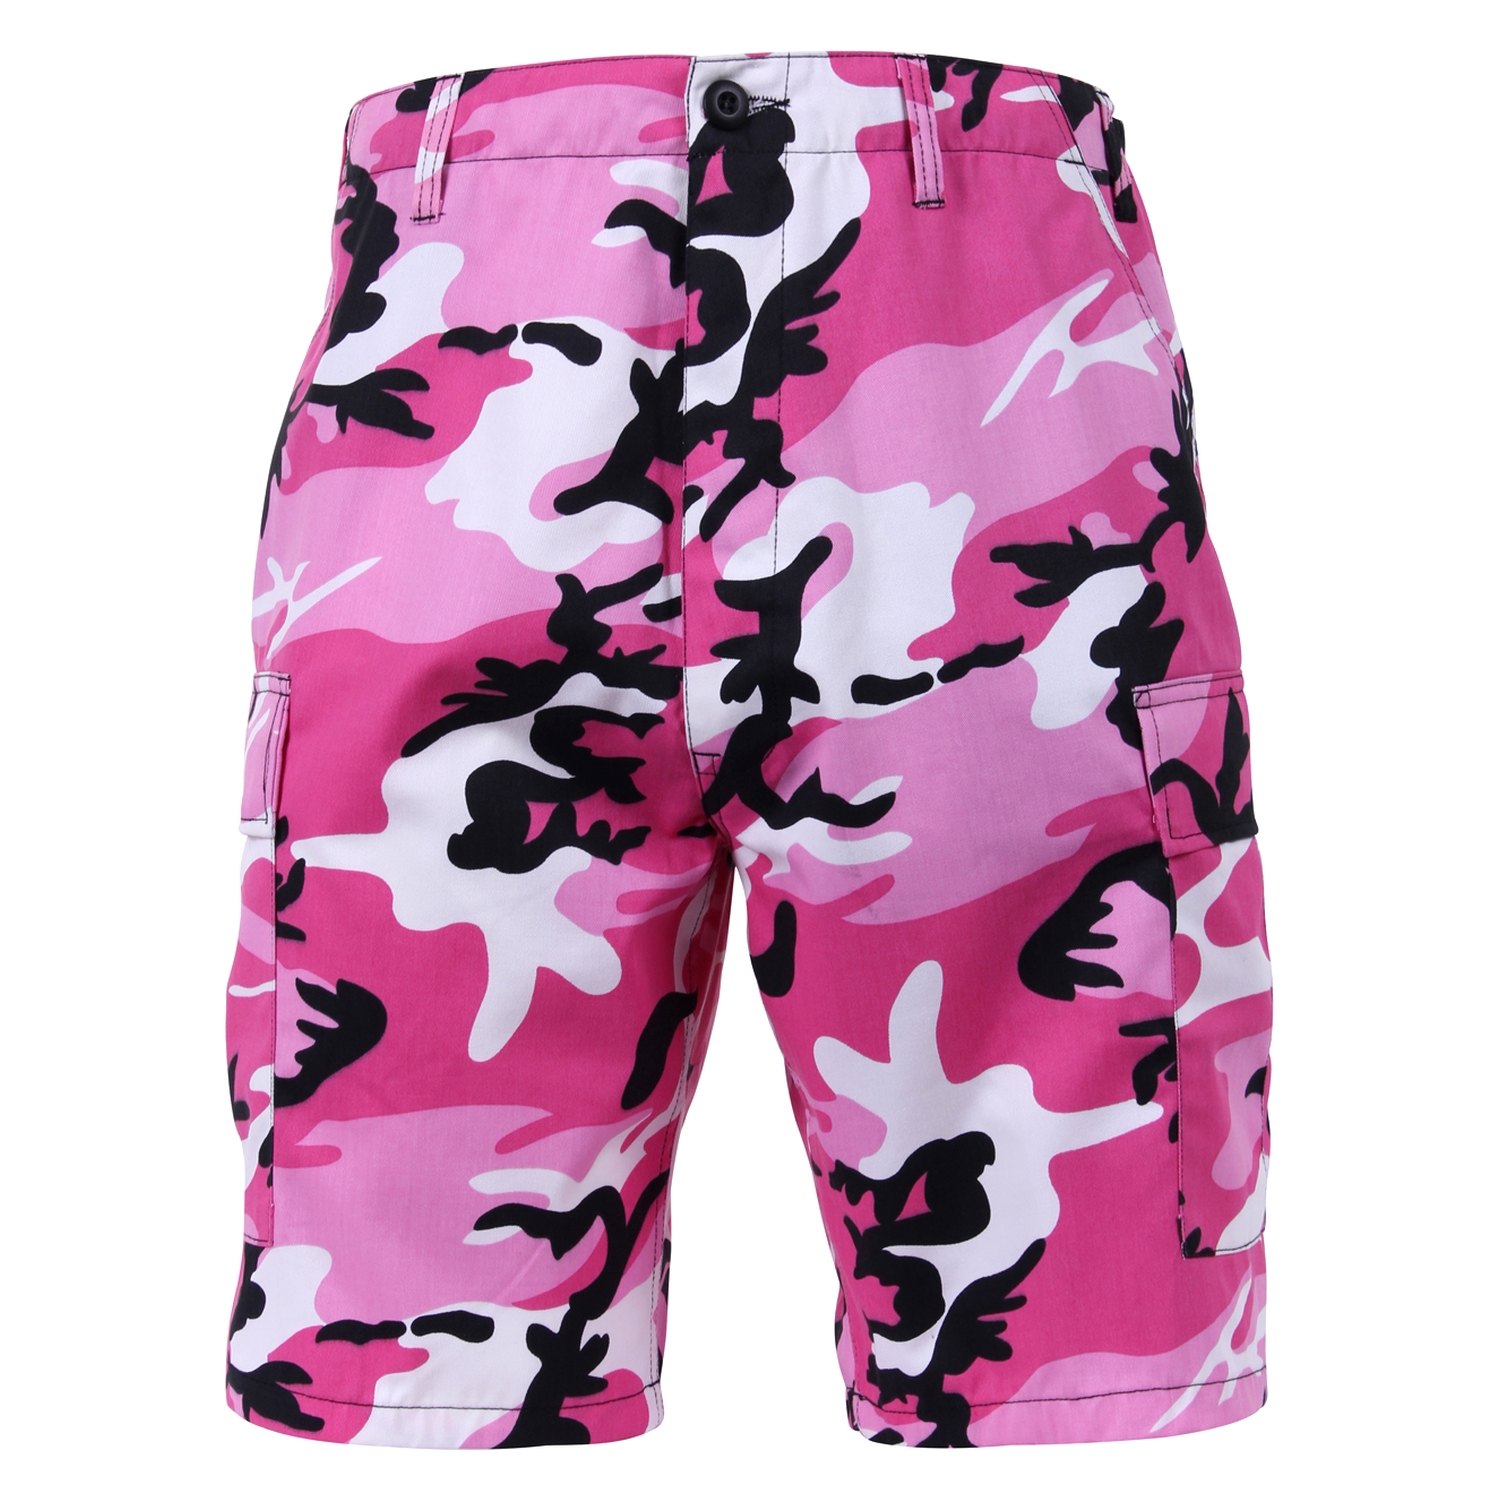 Rothco® 65421 - XX-Large Pink Camo Colored BDU Shorts